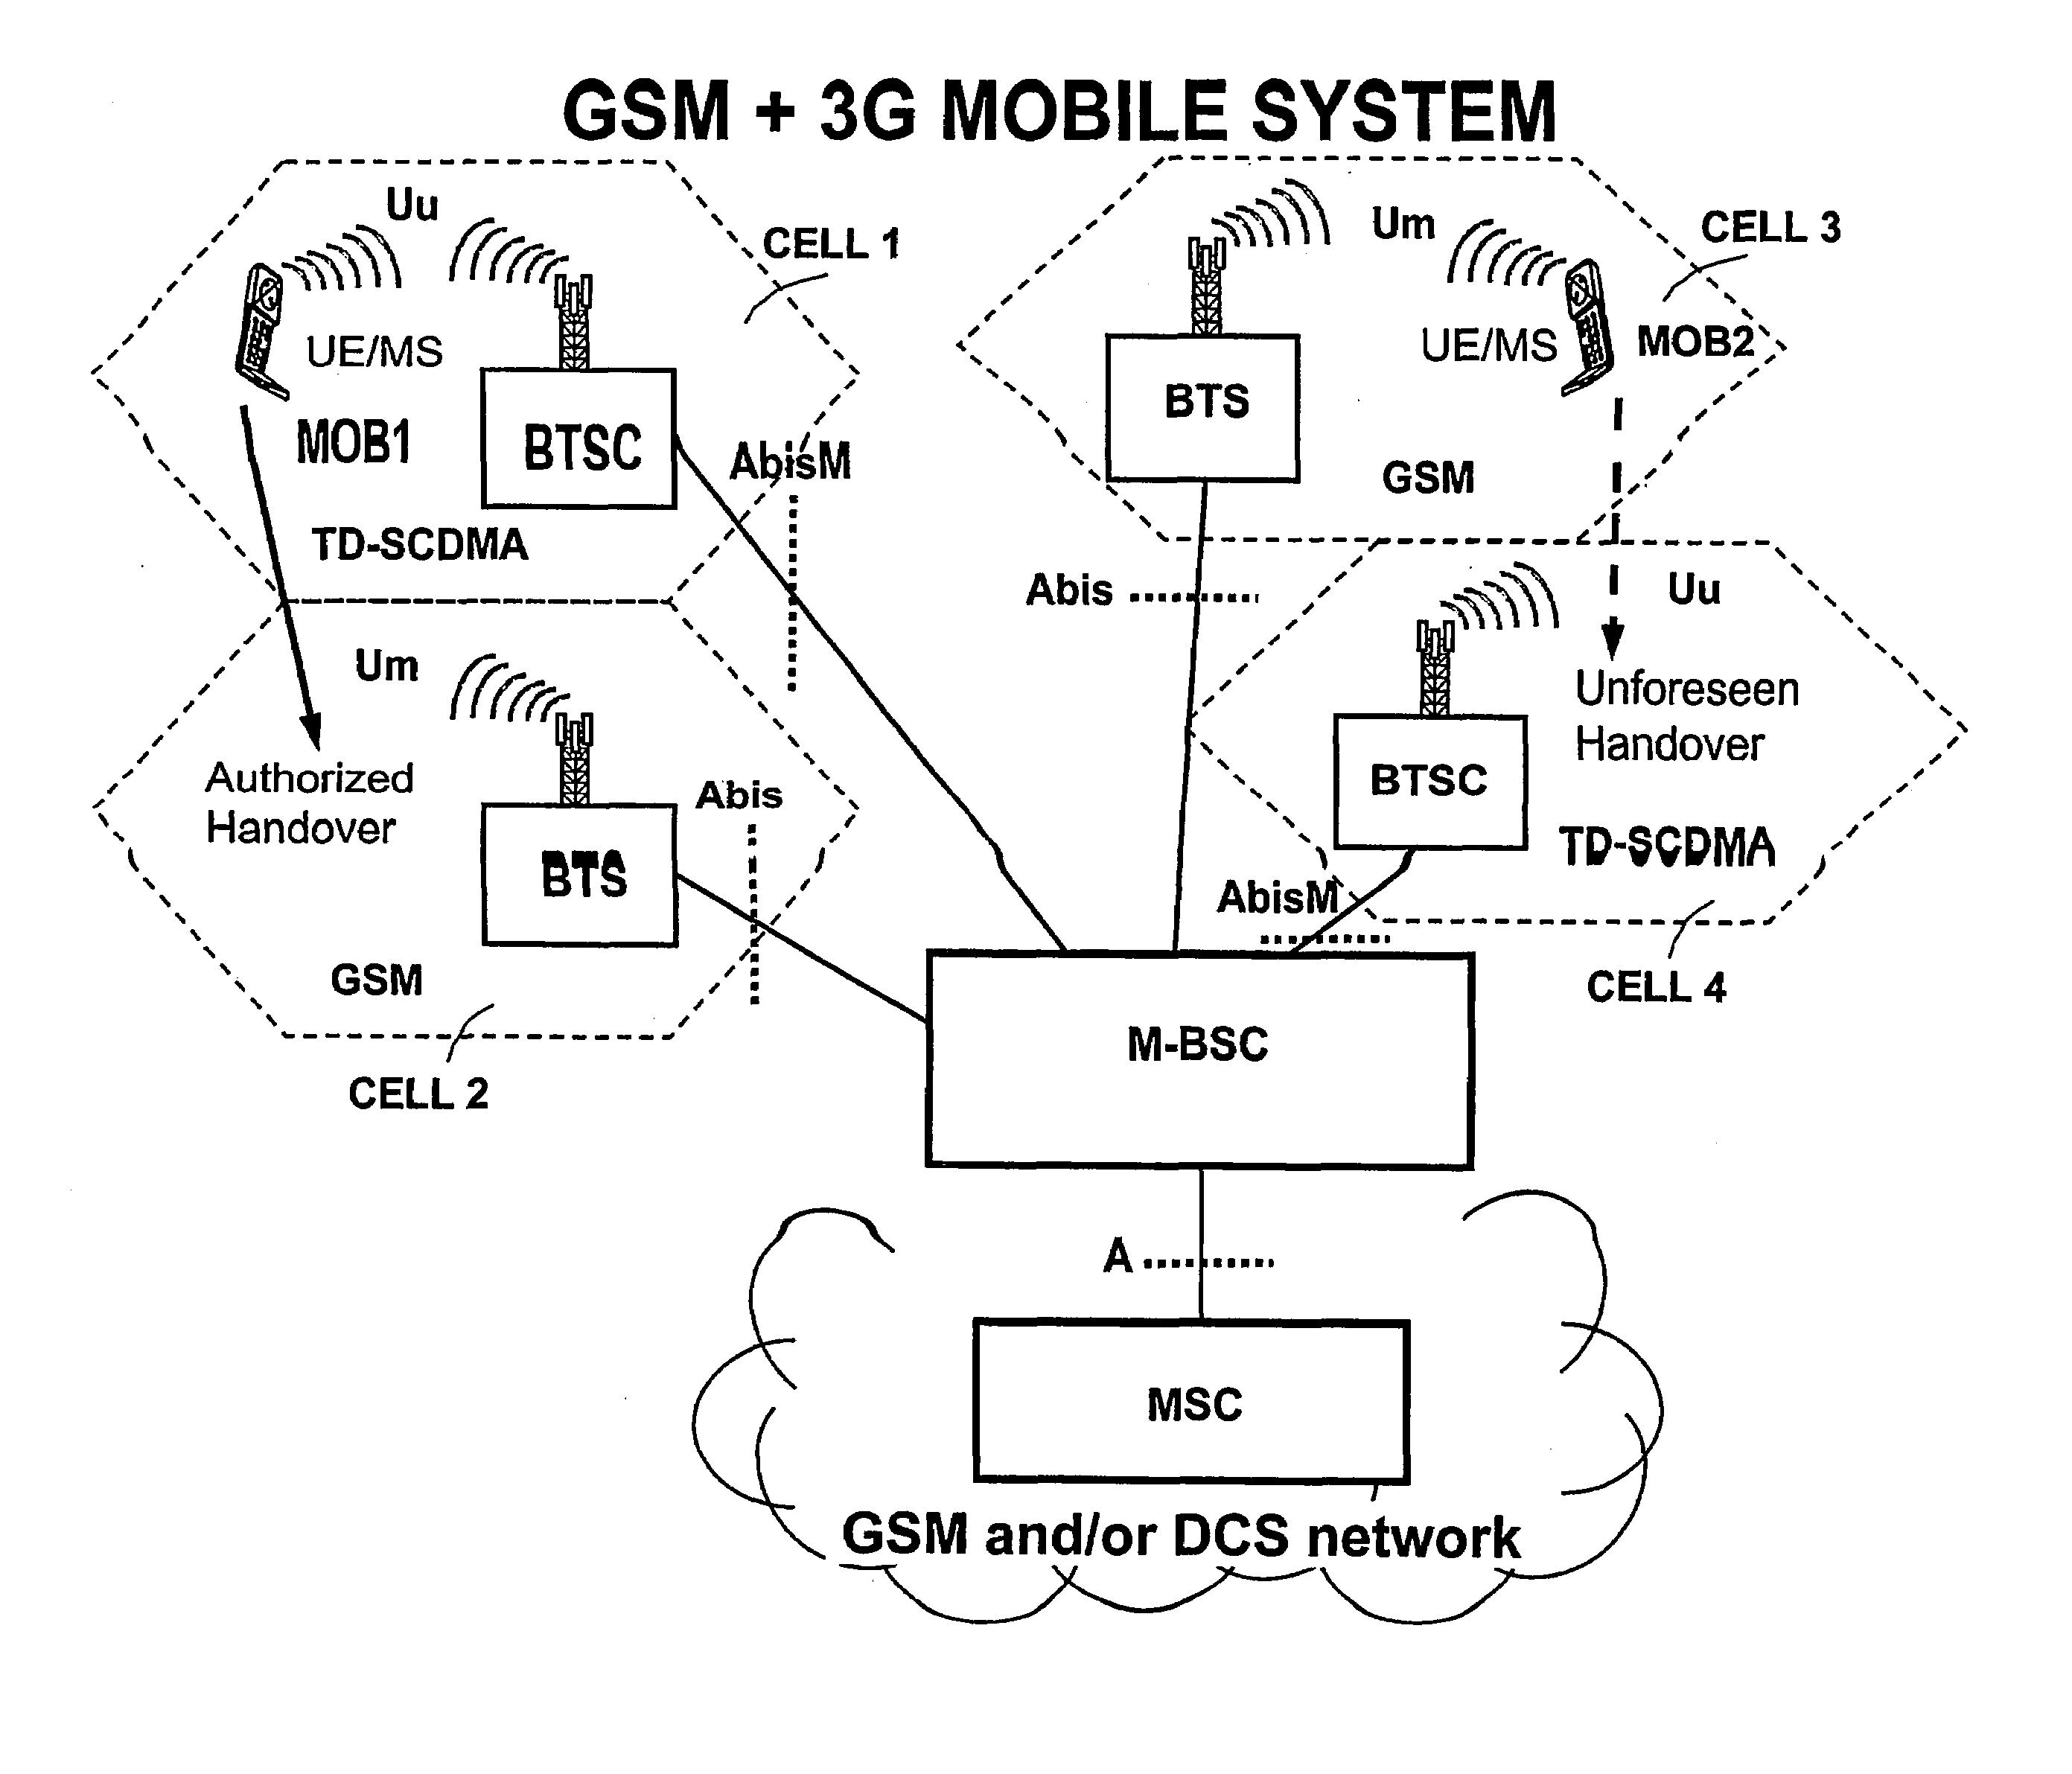 Controller for GSM and 3G base transceiver stations in a GSM core network with external handover possibility from 3G cells to GSM cells transparent to GSM core network